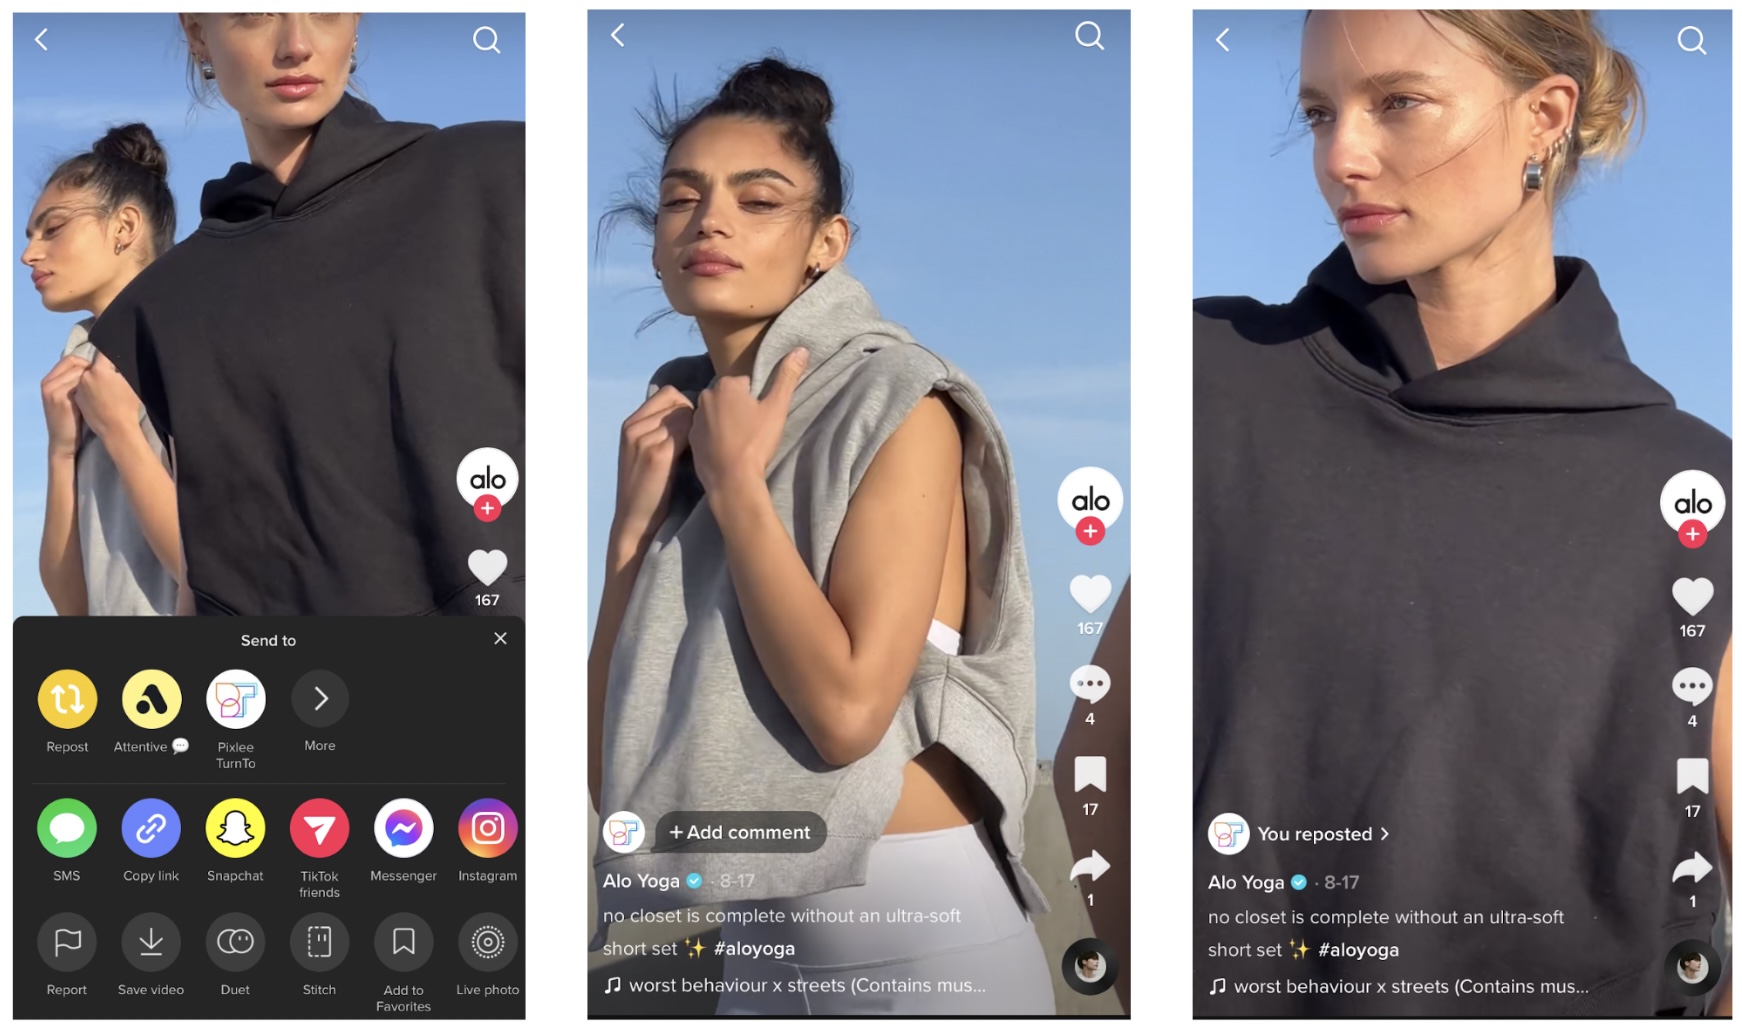 Three screenshots from a platform, possibly TikTok, featuring models in sportswear with branding for "Alo Yoga."